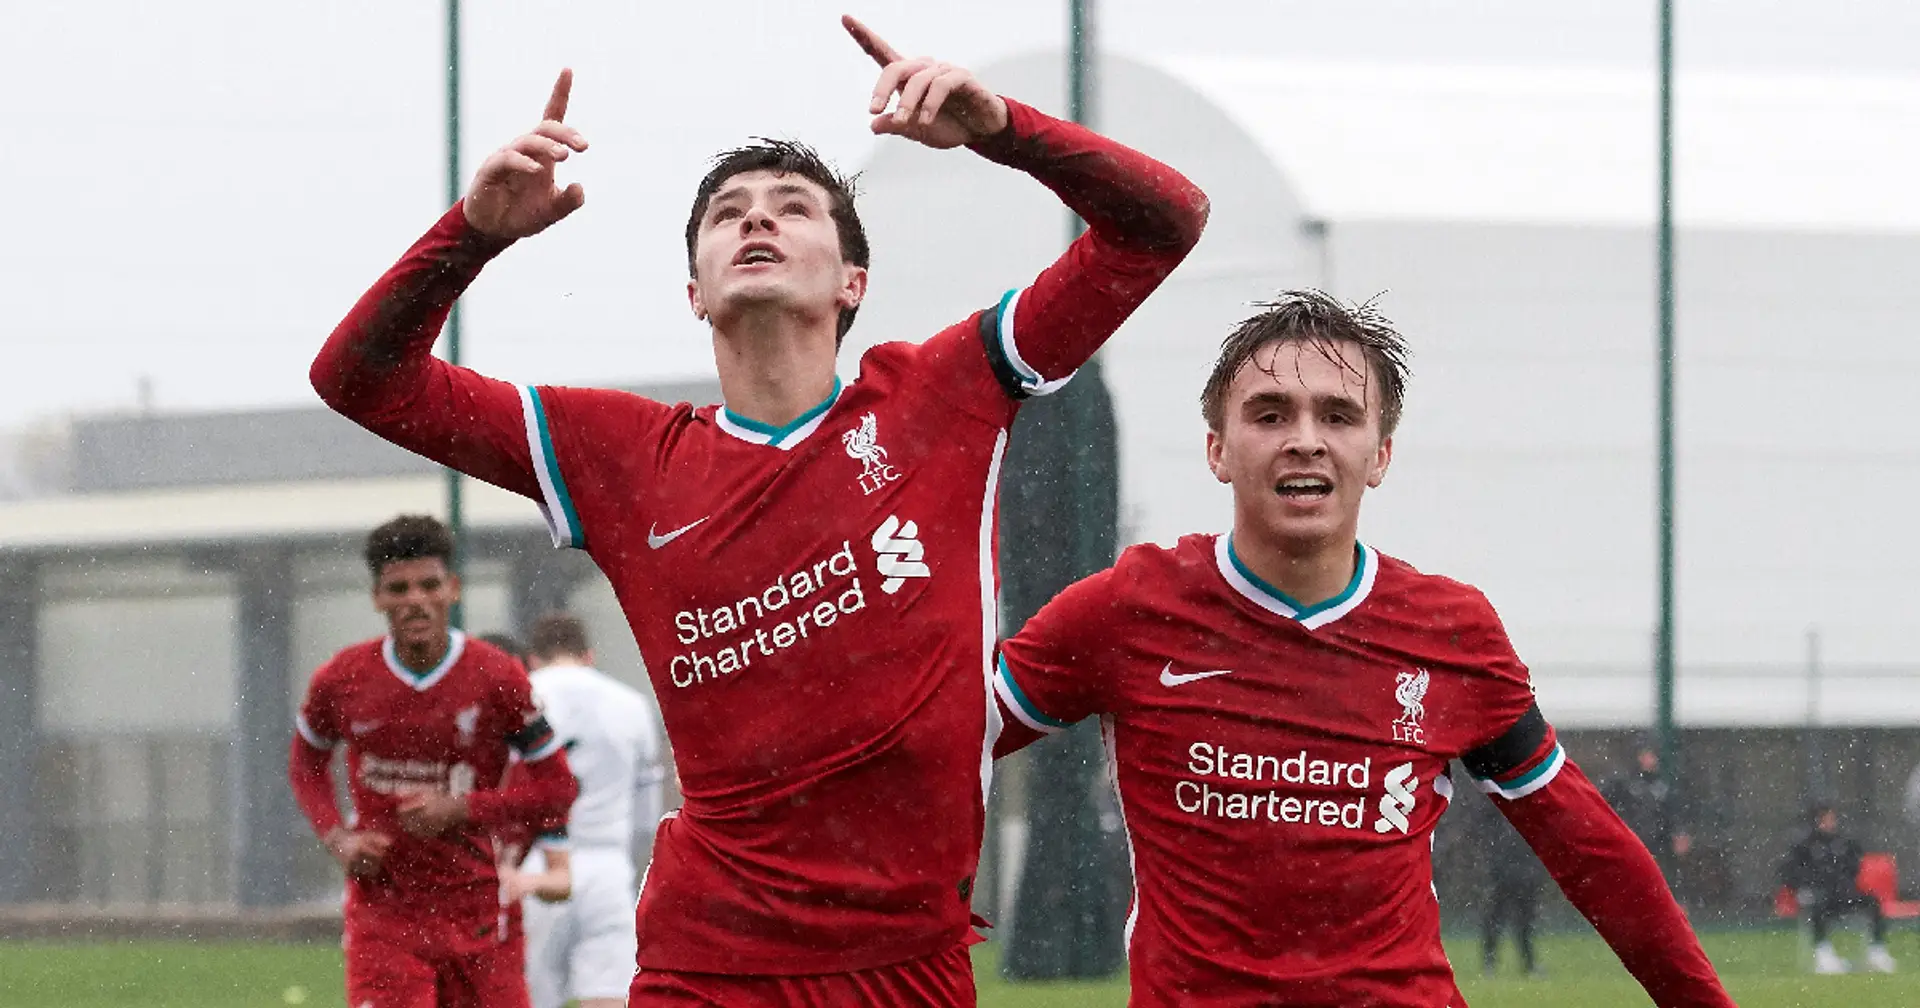 Liverpool U18s end season with emphatic 4-1 win over Spurs